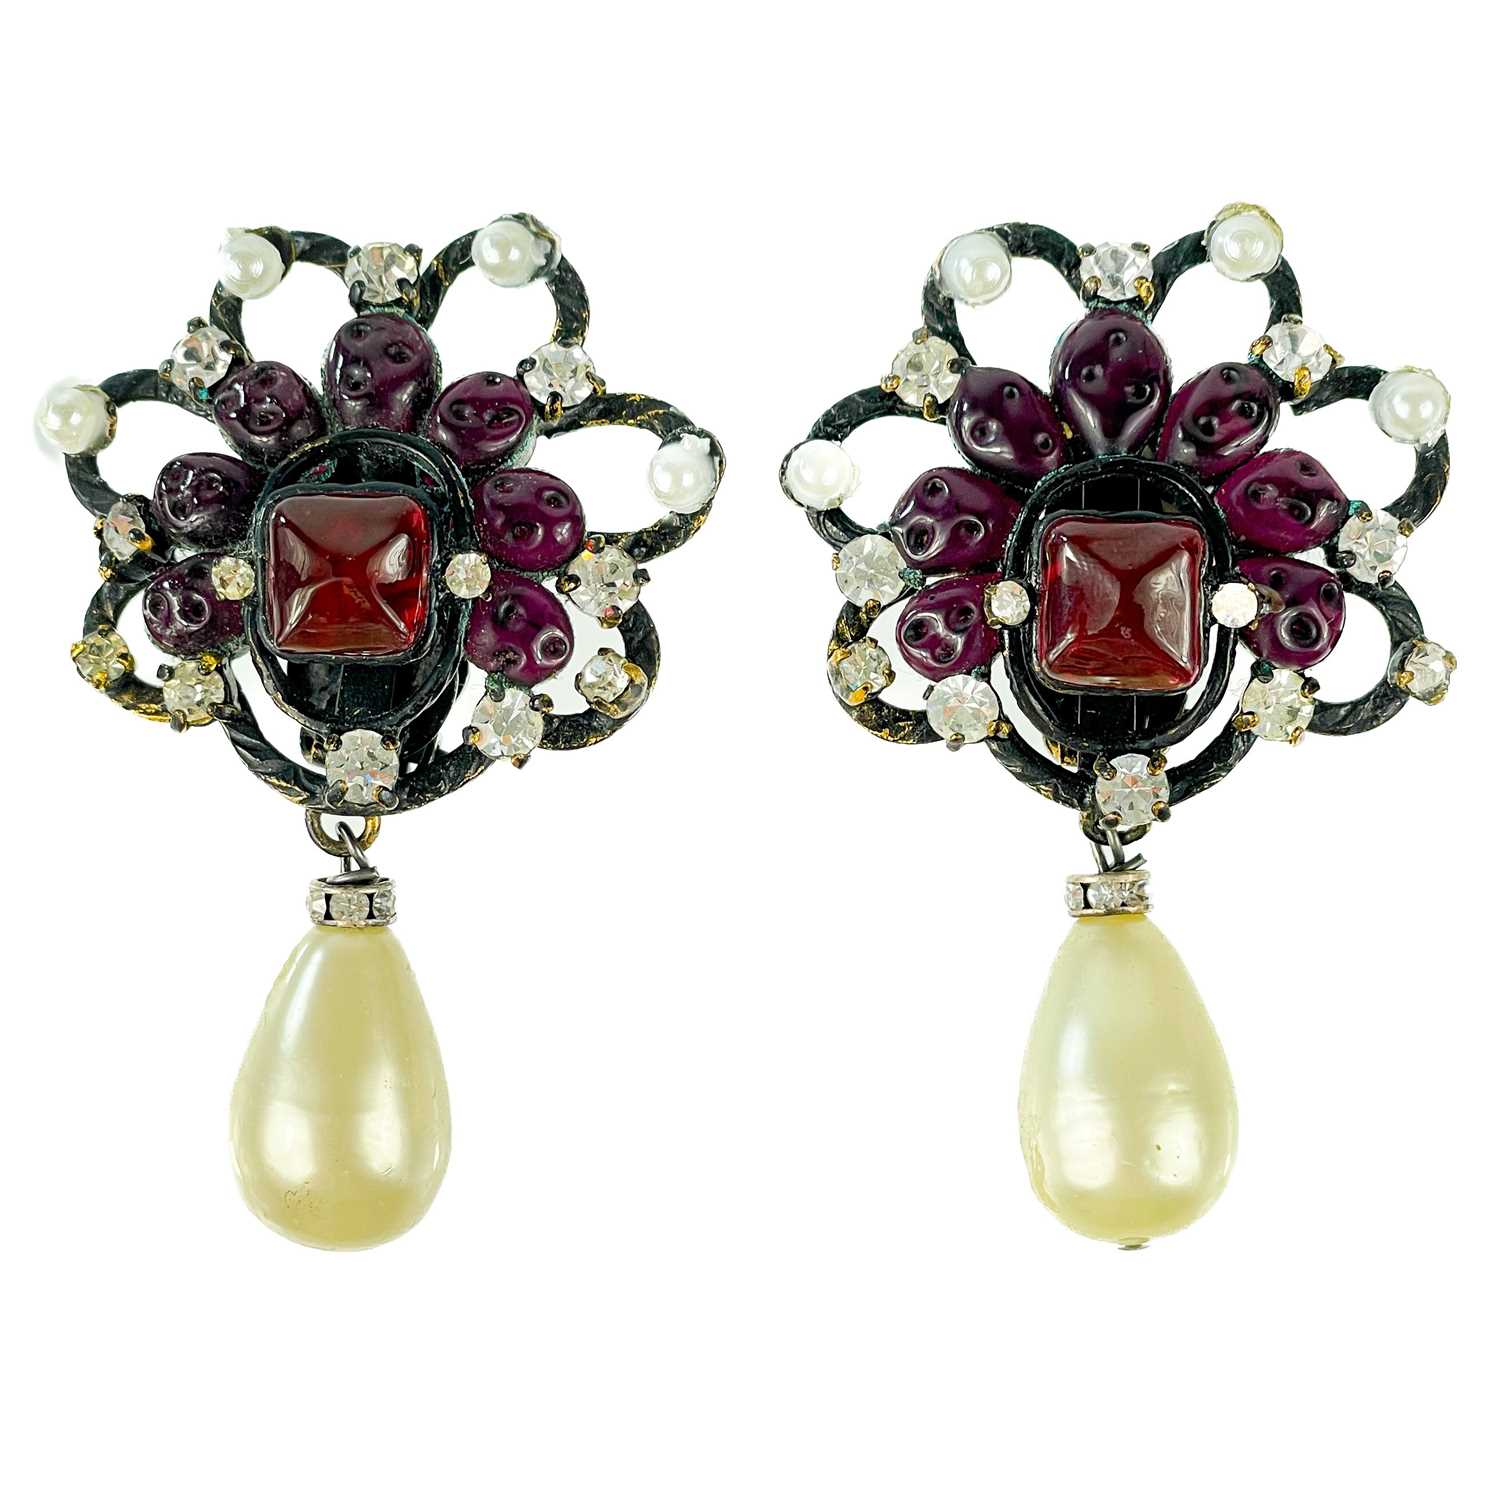 A Chanel pair of 1970's blackened metal Gripoix, faux pearl and crystal earrings.